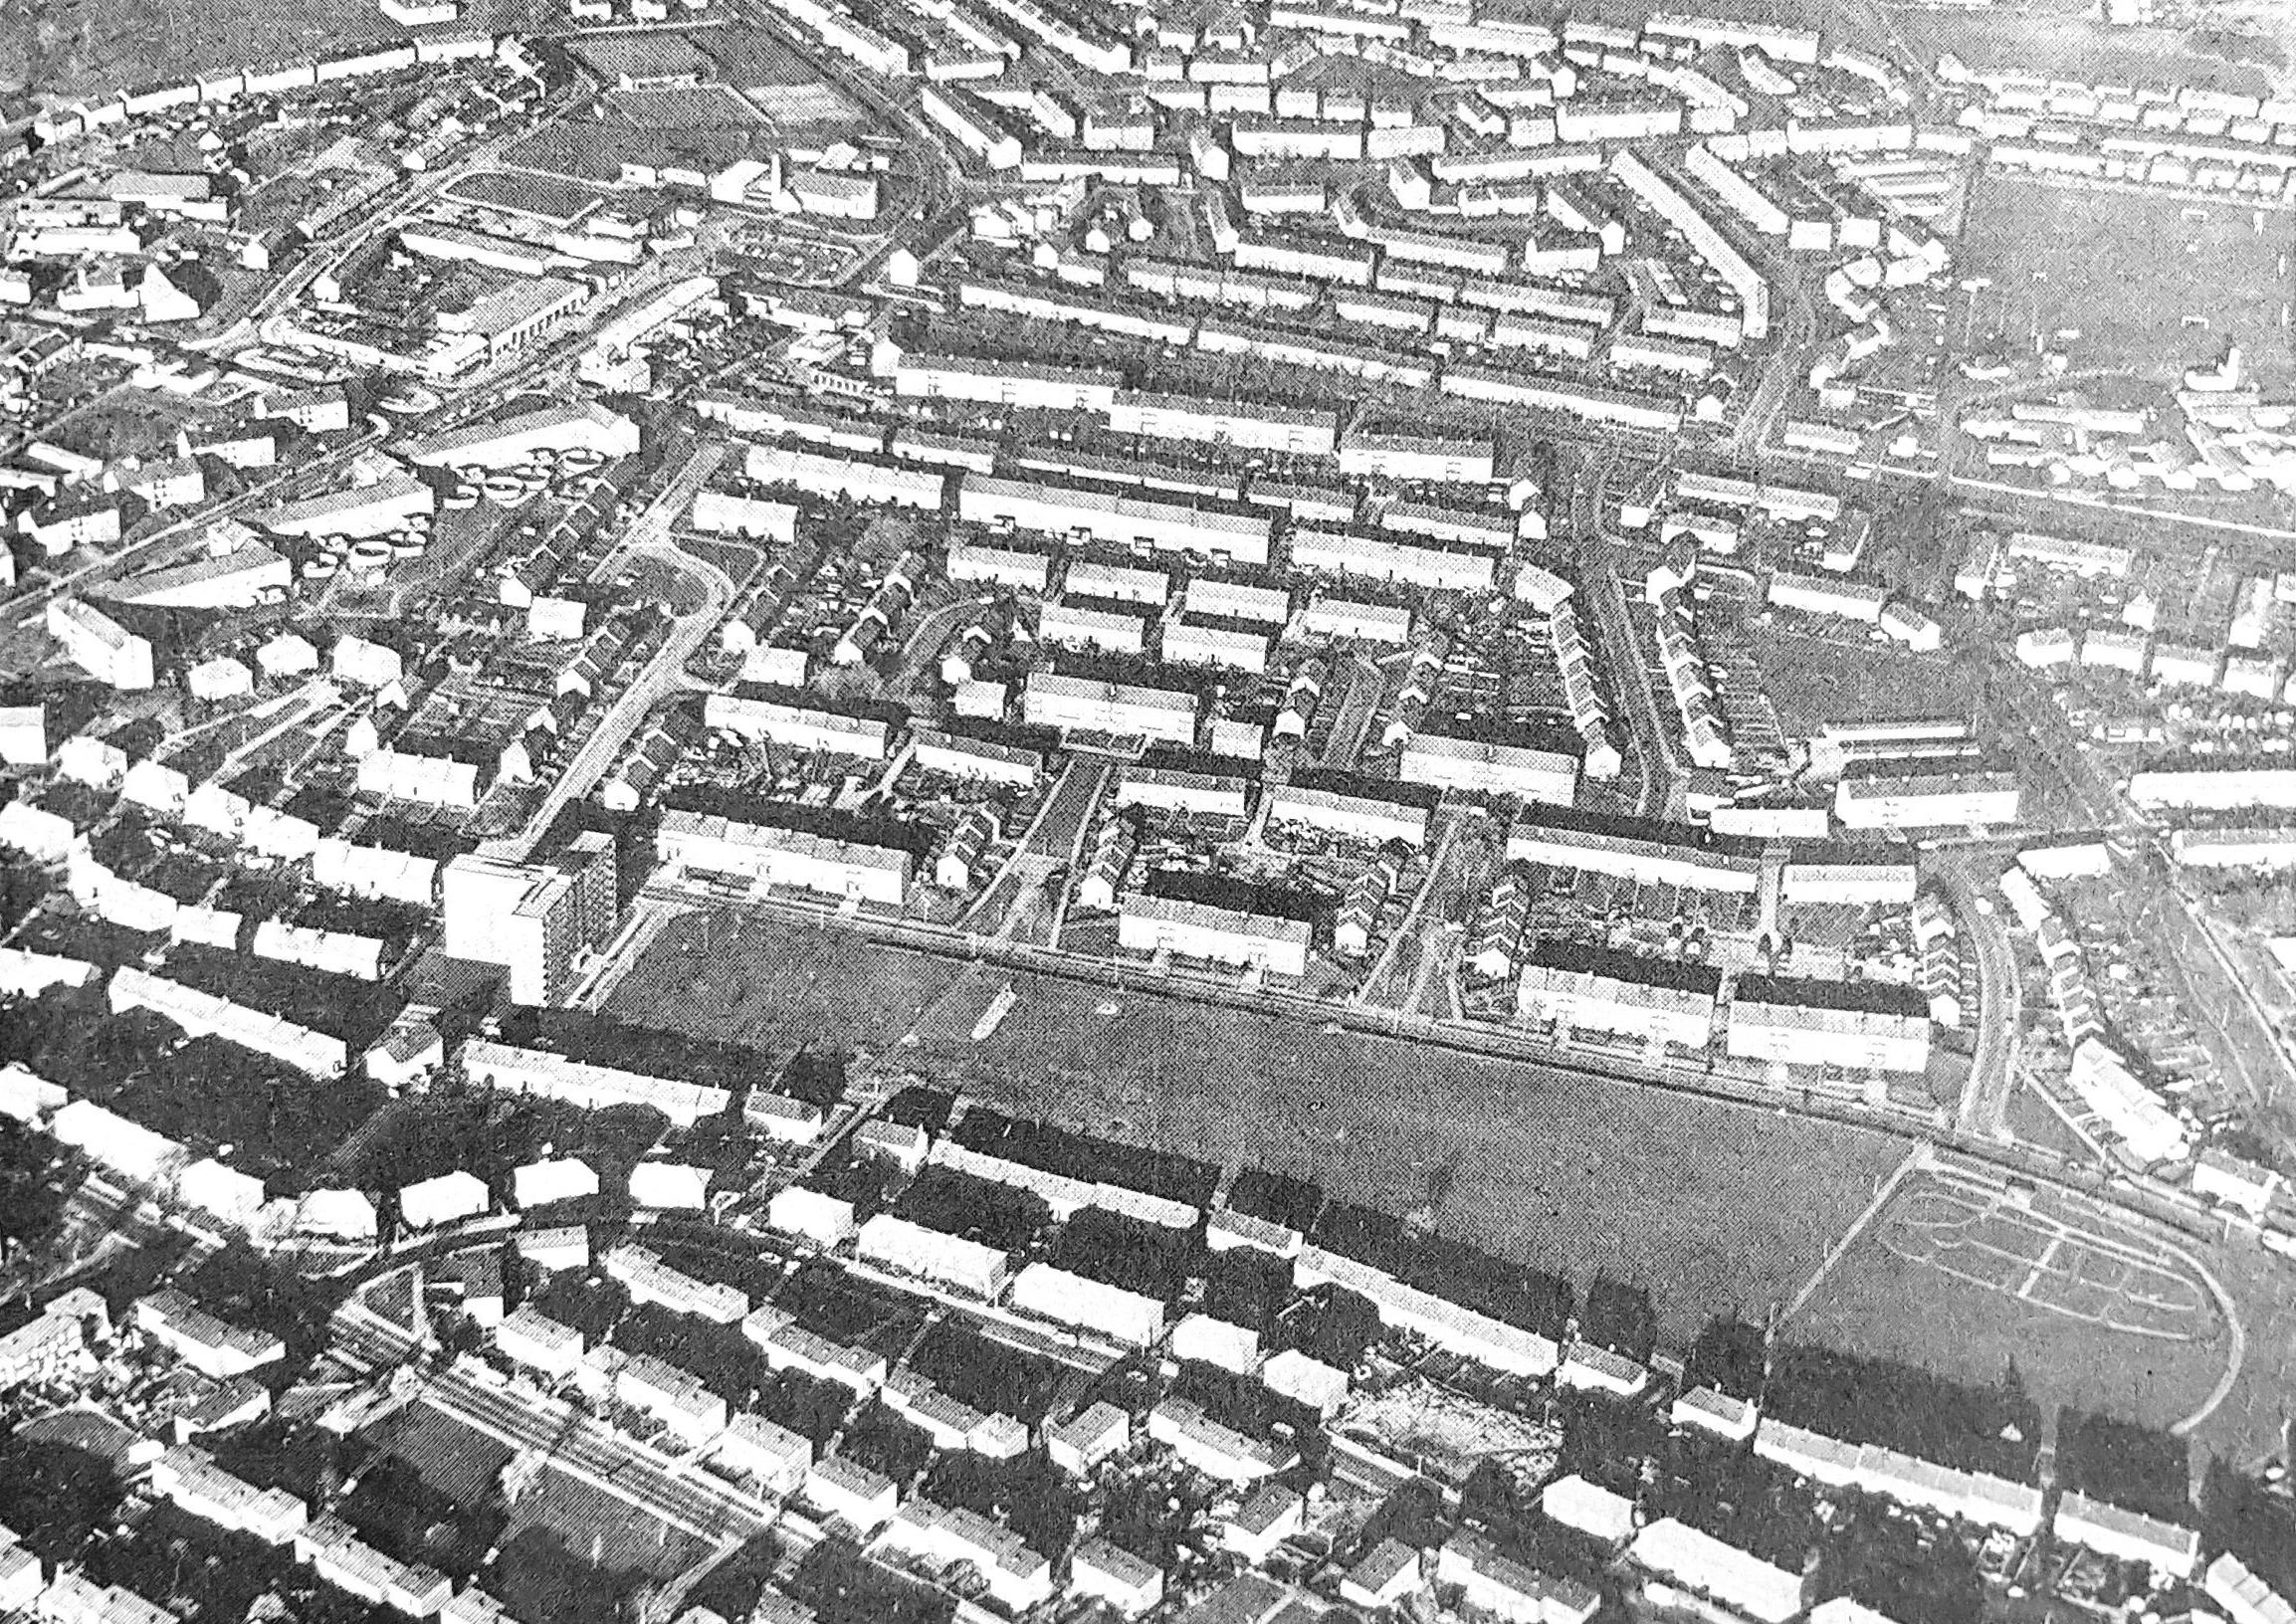 We start with this picture overlooking the Valley area of town. Kirkcaldy's first ever mulit-storey flats can be seen to left of the grassy area.